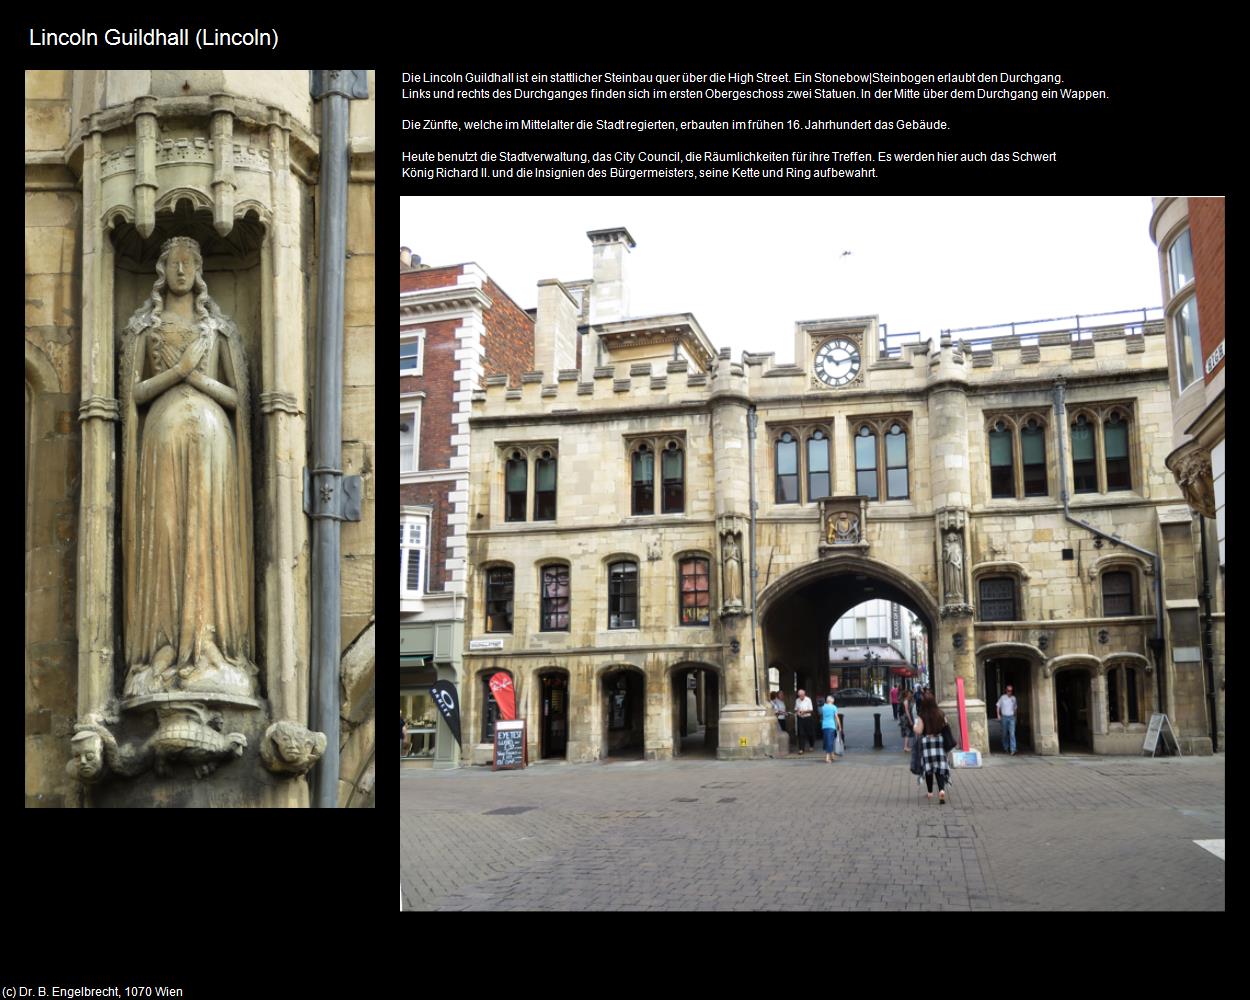 Lincoln Guildhall  (Lincoln, England) in Kulturatlas-ENGLAND und WALES